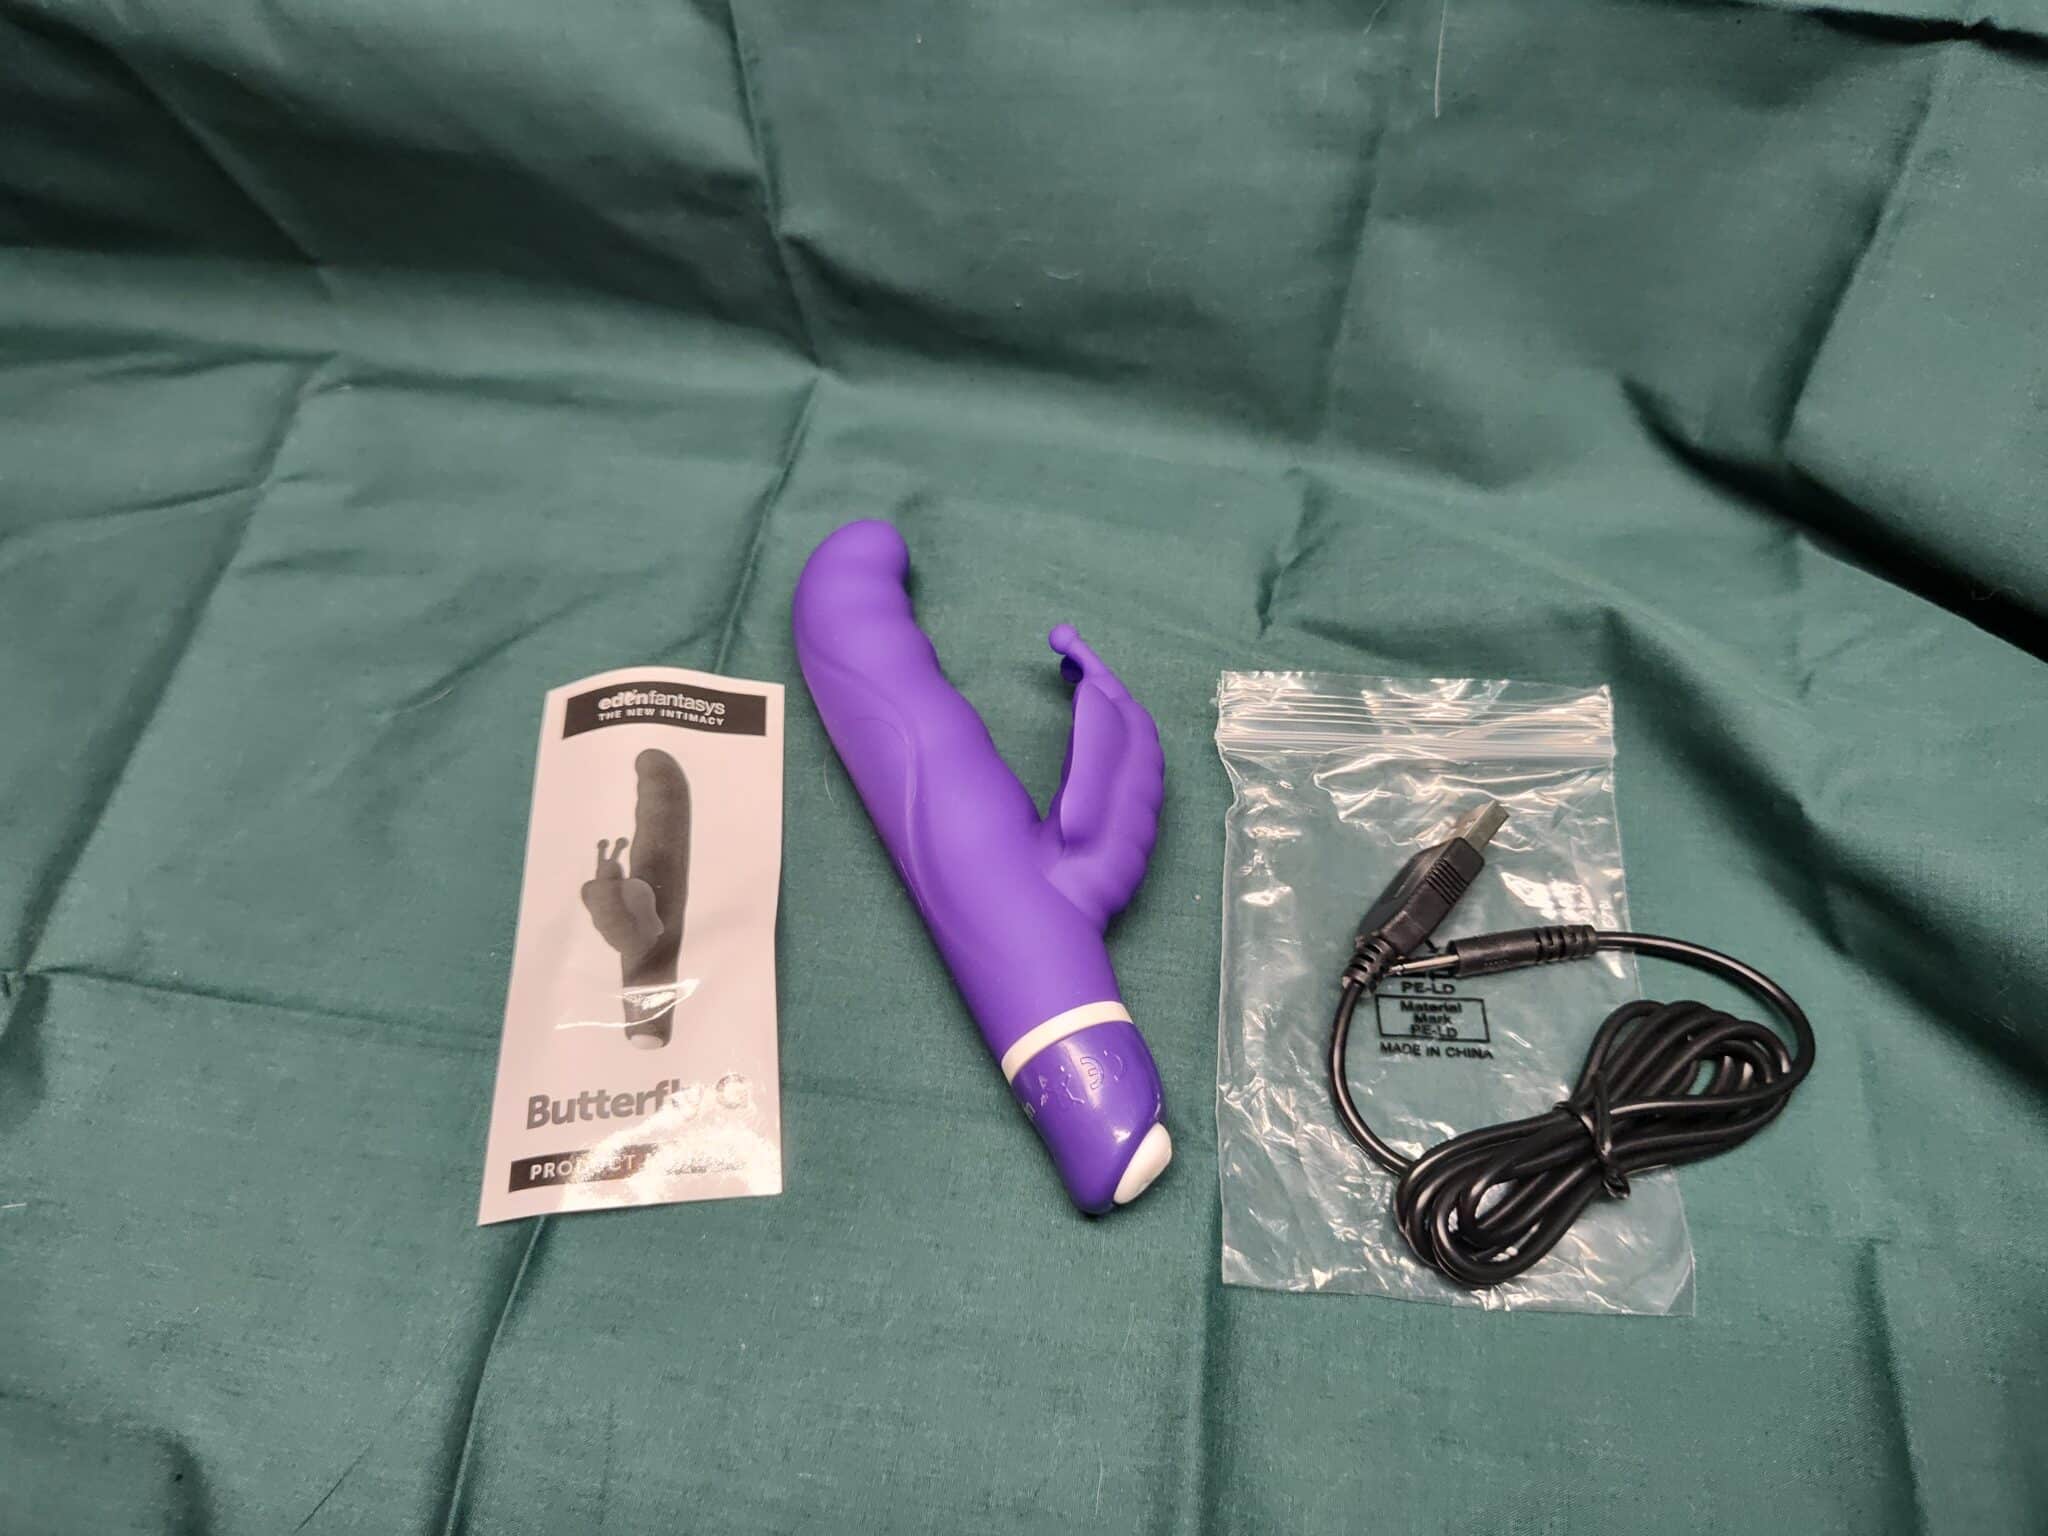 EdenFantasys Butterfly G Rabbit Vibrator Exploring the Materials and Care of the EdenFantasys Butterfly G Rabbit Vibrator